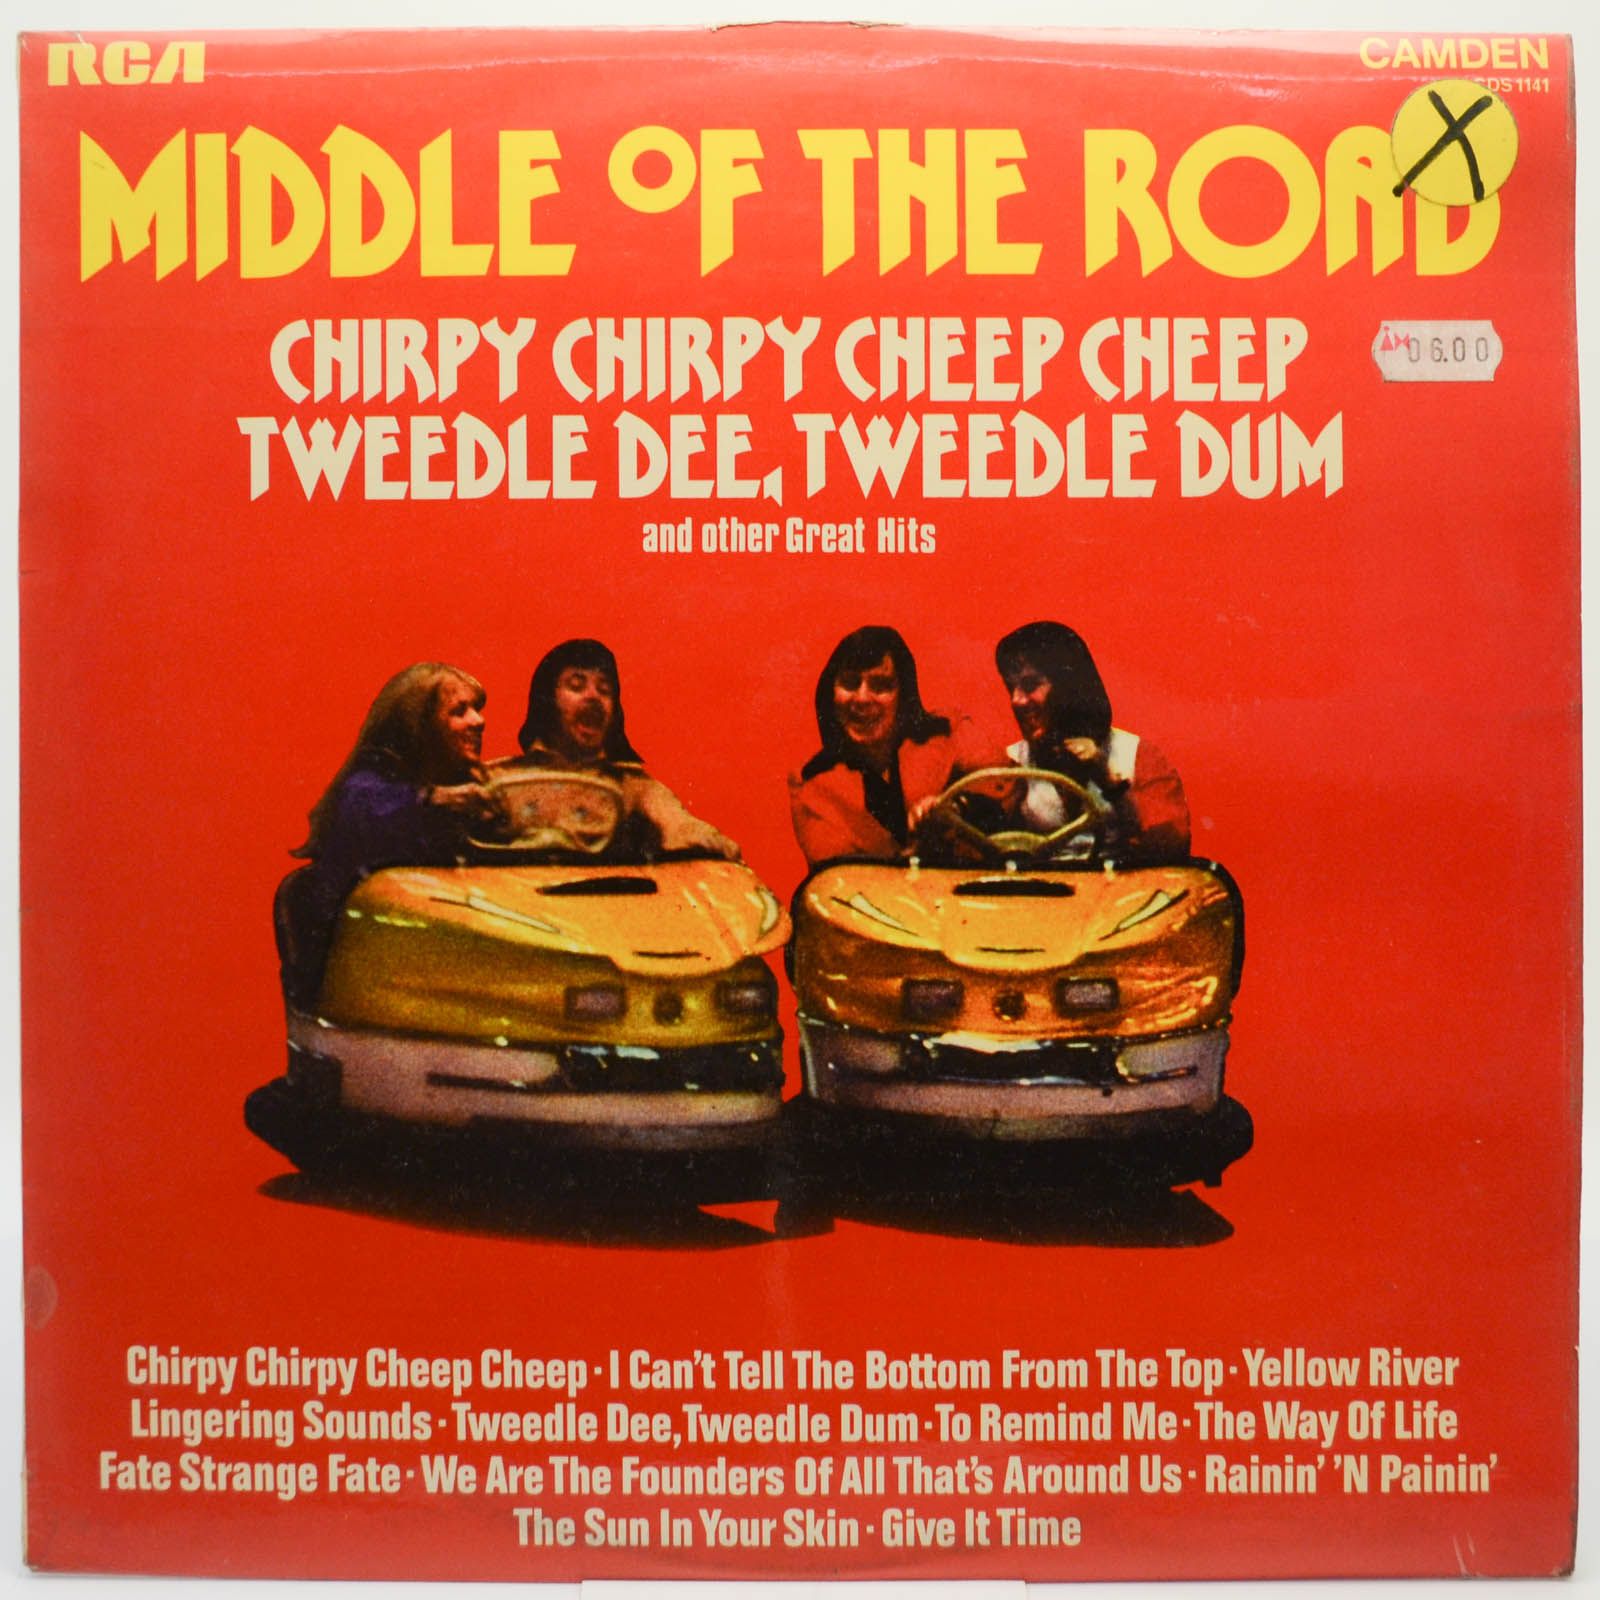 Middle Of The Road — Chirpy Chirpy Cheep Cheep Tweedle Dee, Tweedle Dum And Other Great Hits (UK), 1971